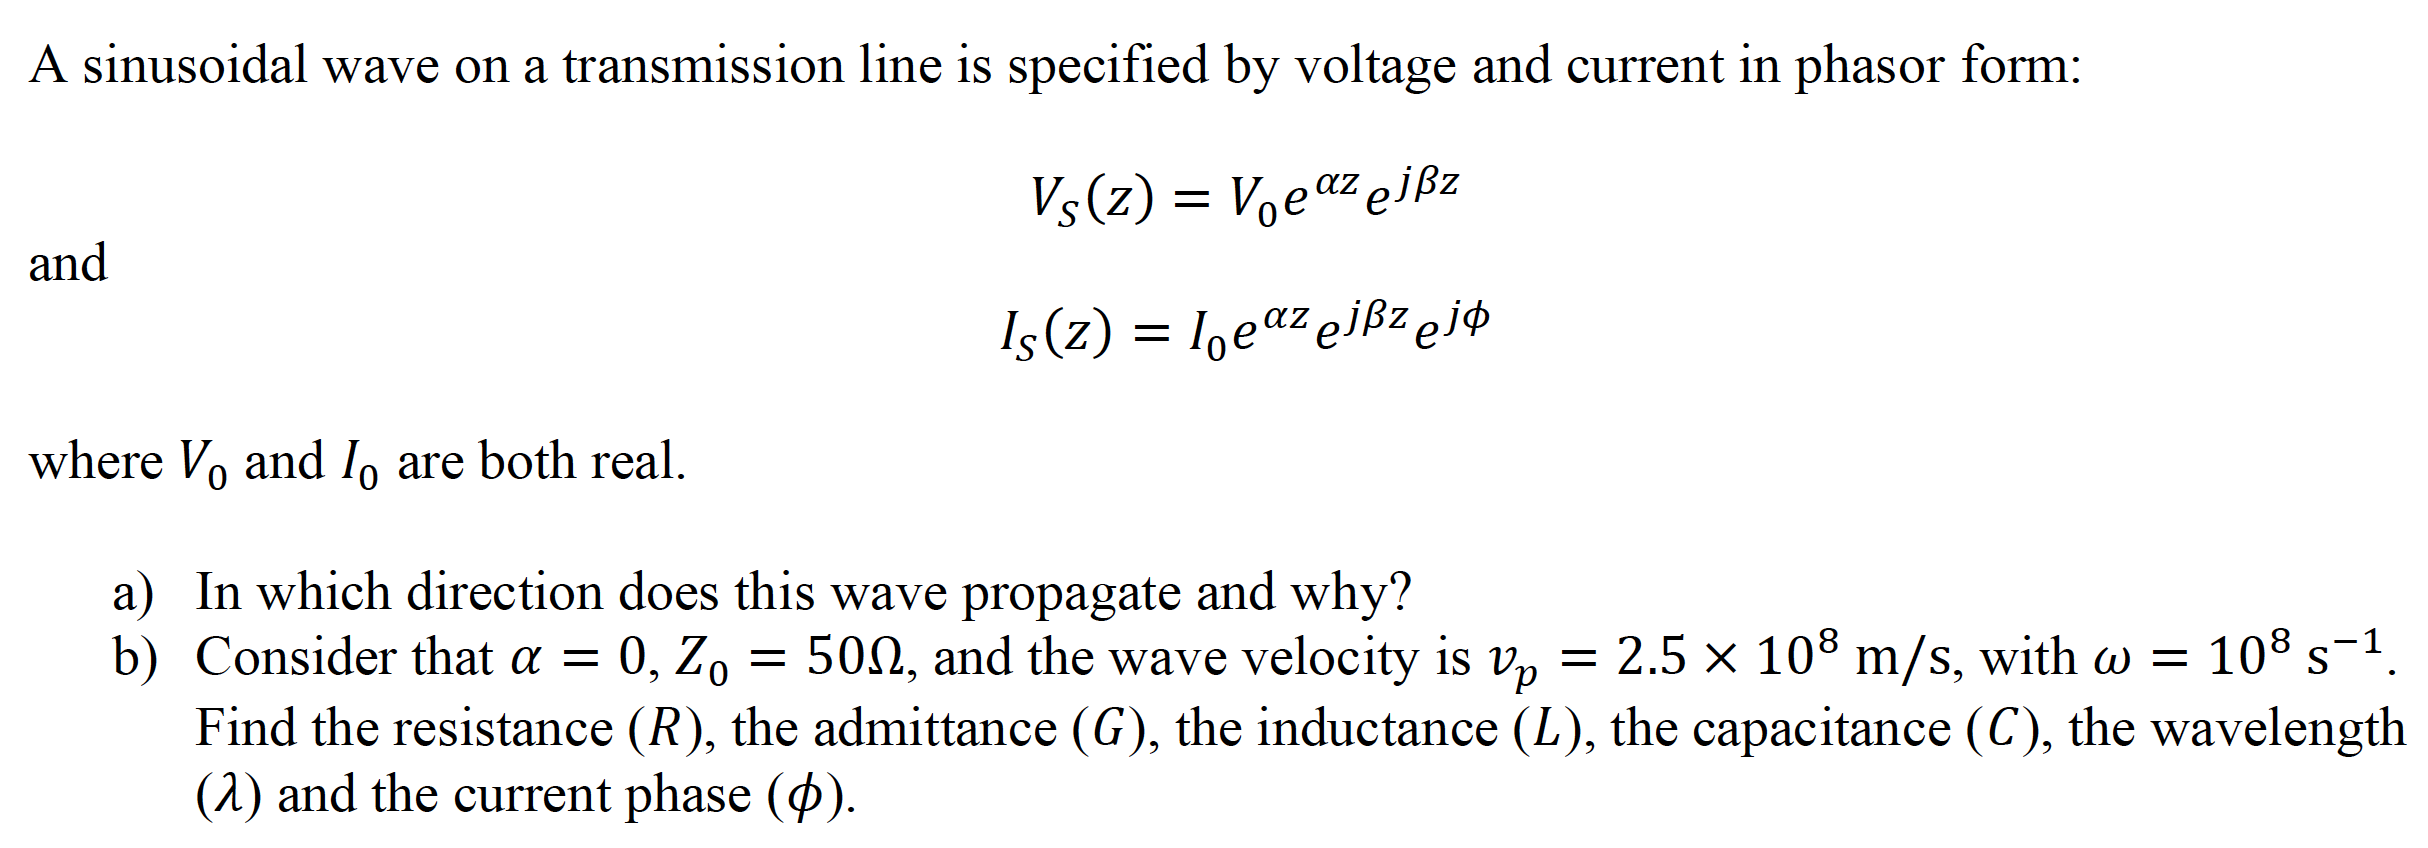 A sinusoidal wave on a transmission line is specified by voltage and current in phasor form:
Vs(z) = Voeaz ejßz
and
Is(z) = 1,eaz ejßzejp
where Vo and I, are both real.
a) In which direction does this wave propagate and why?
b) Consider that a = 0, Zo
500, and the wave velocity is v, = 2.5 × 108 m/s, with w =
108 s-1.
S
Find the resistance (R), the admittance (G), the inductance (L), the capacitance (C), the wavelength
(1) and the current phase ().
